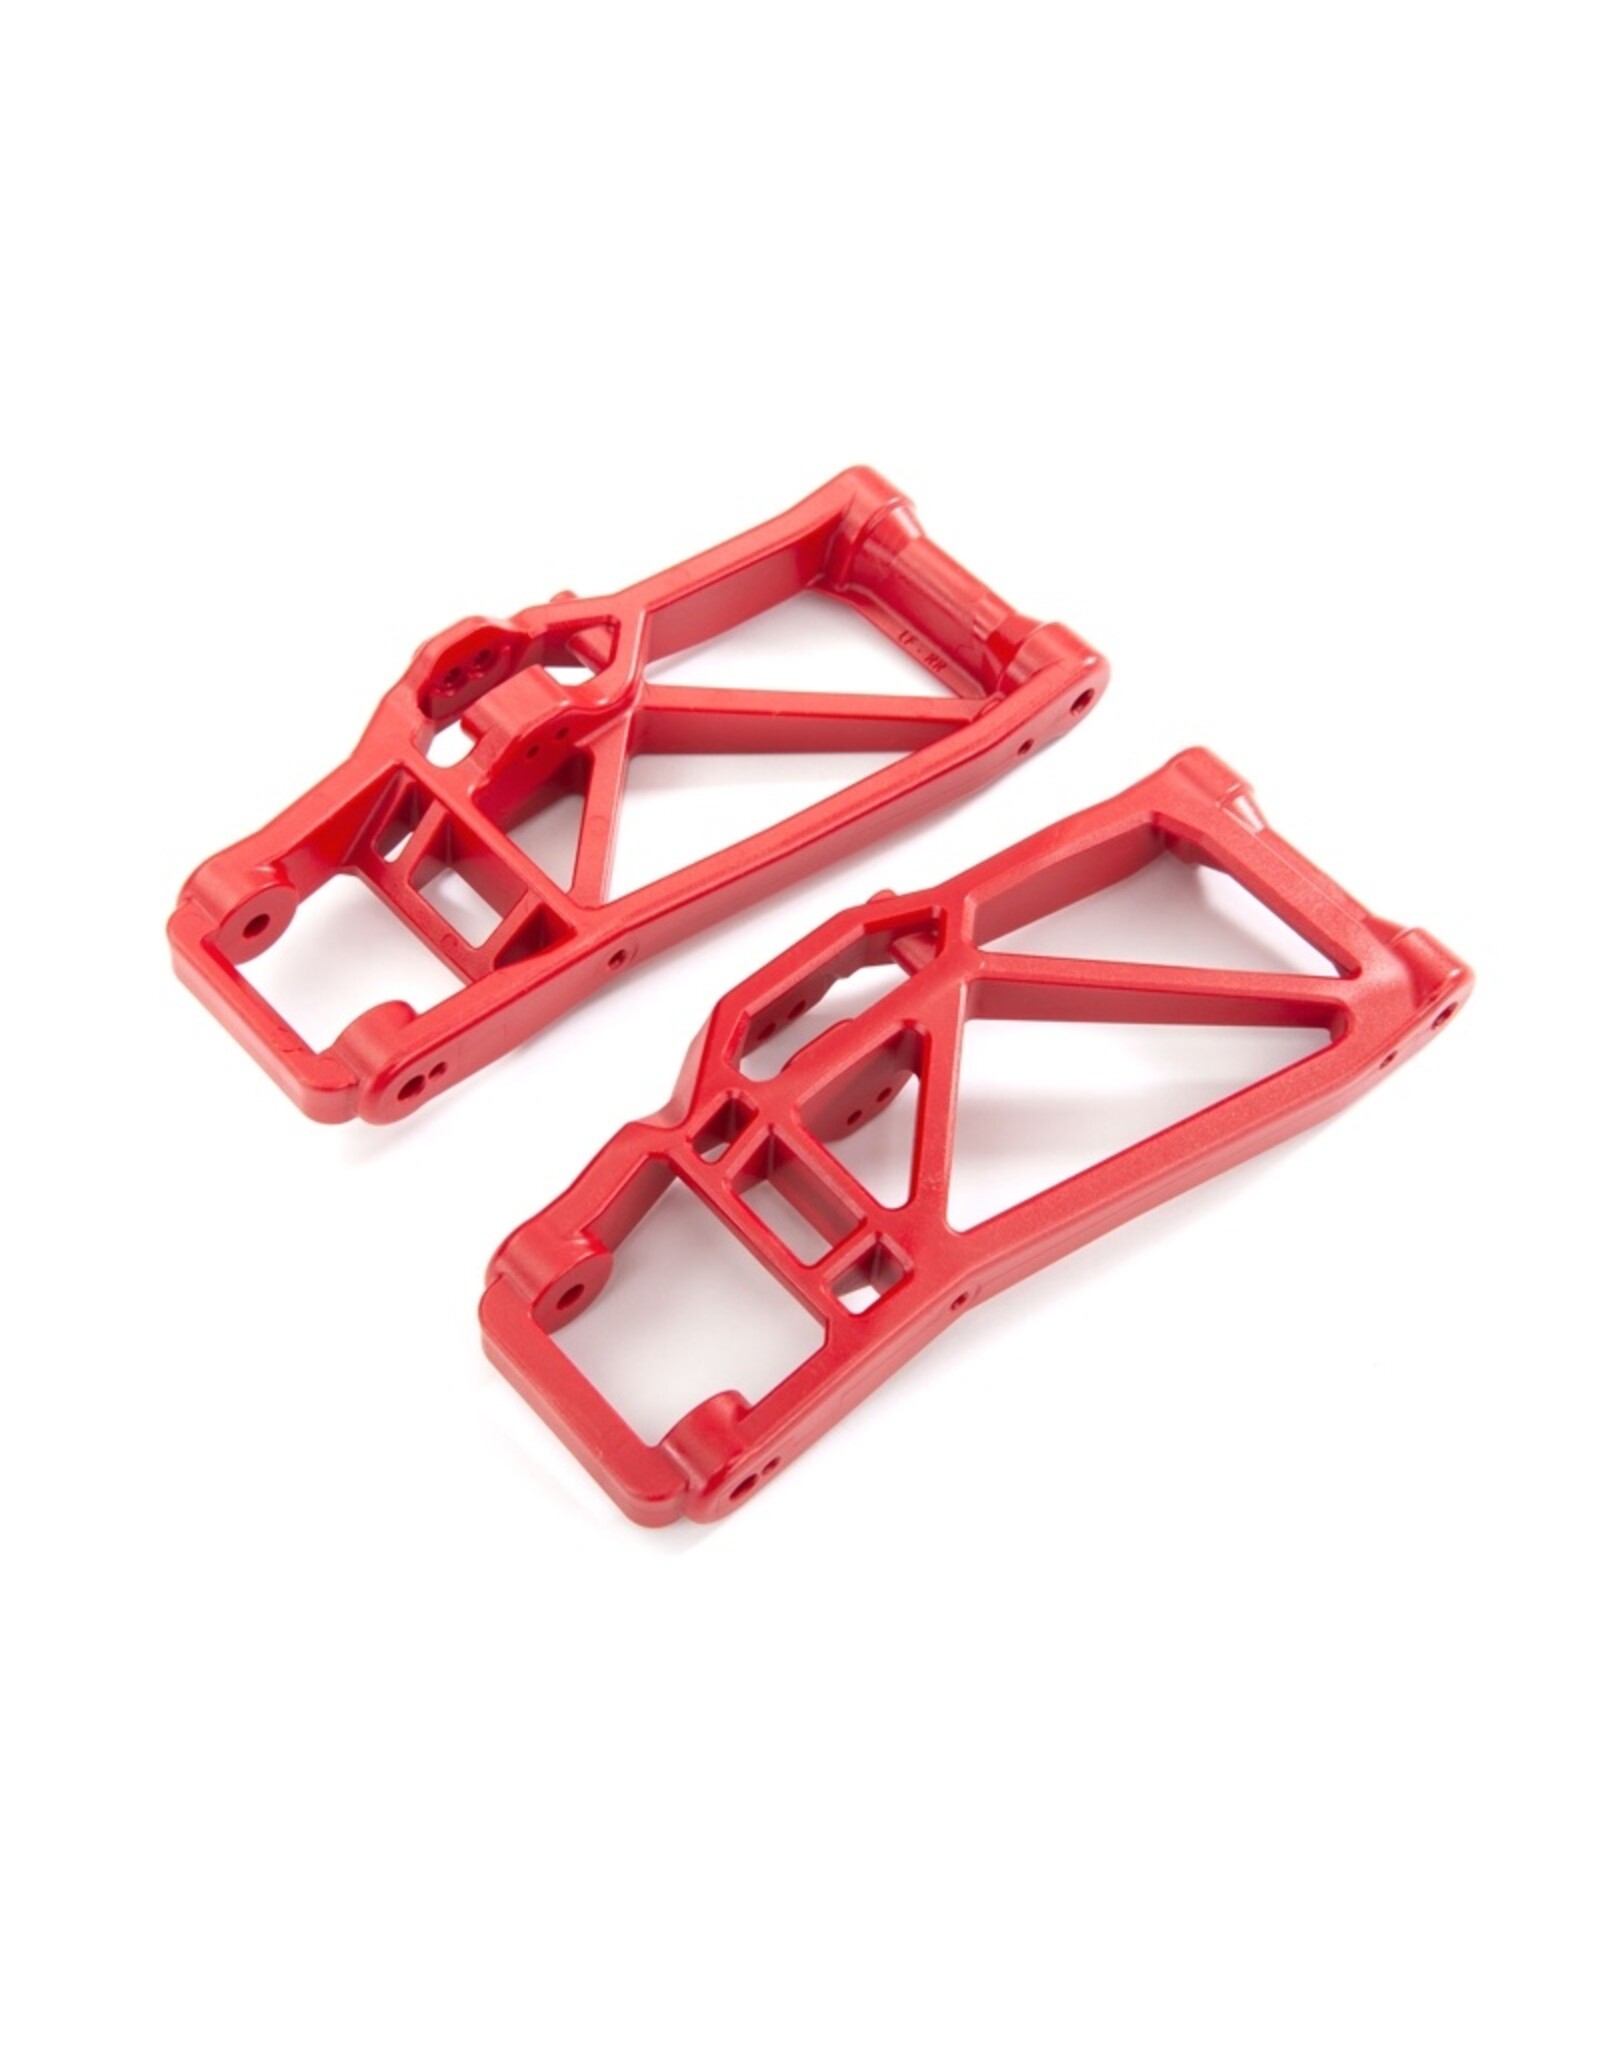 Traxxas tra8930R - Suspension arm, lower, red (left and right, front or rear) (2)